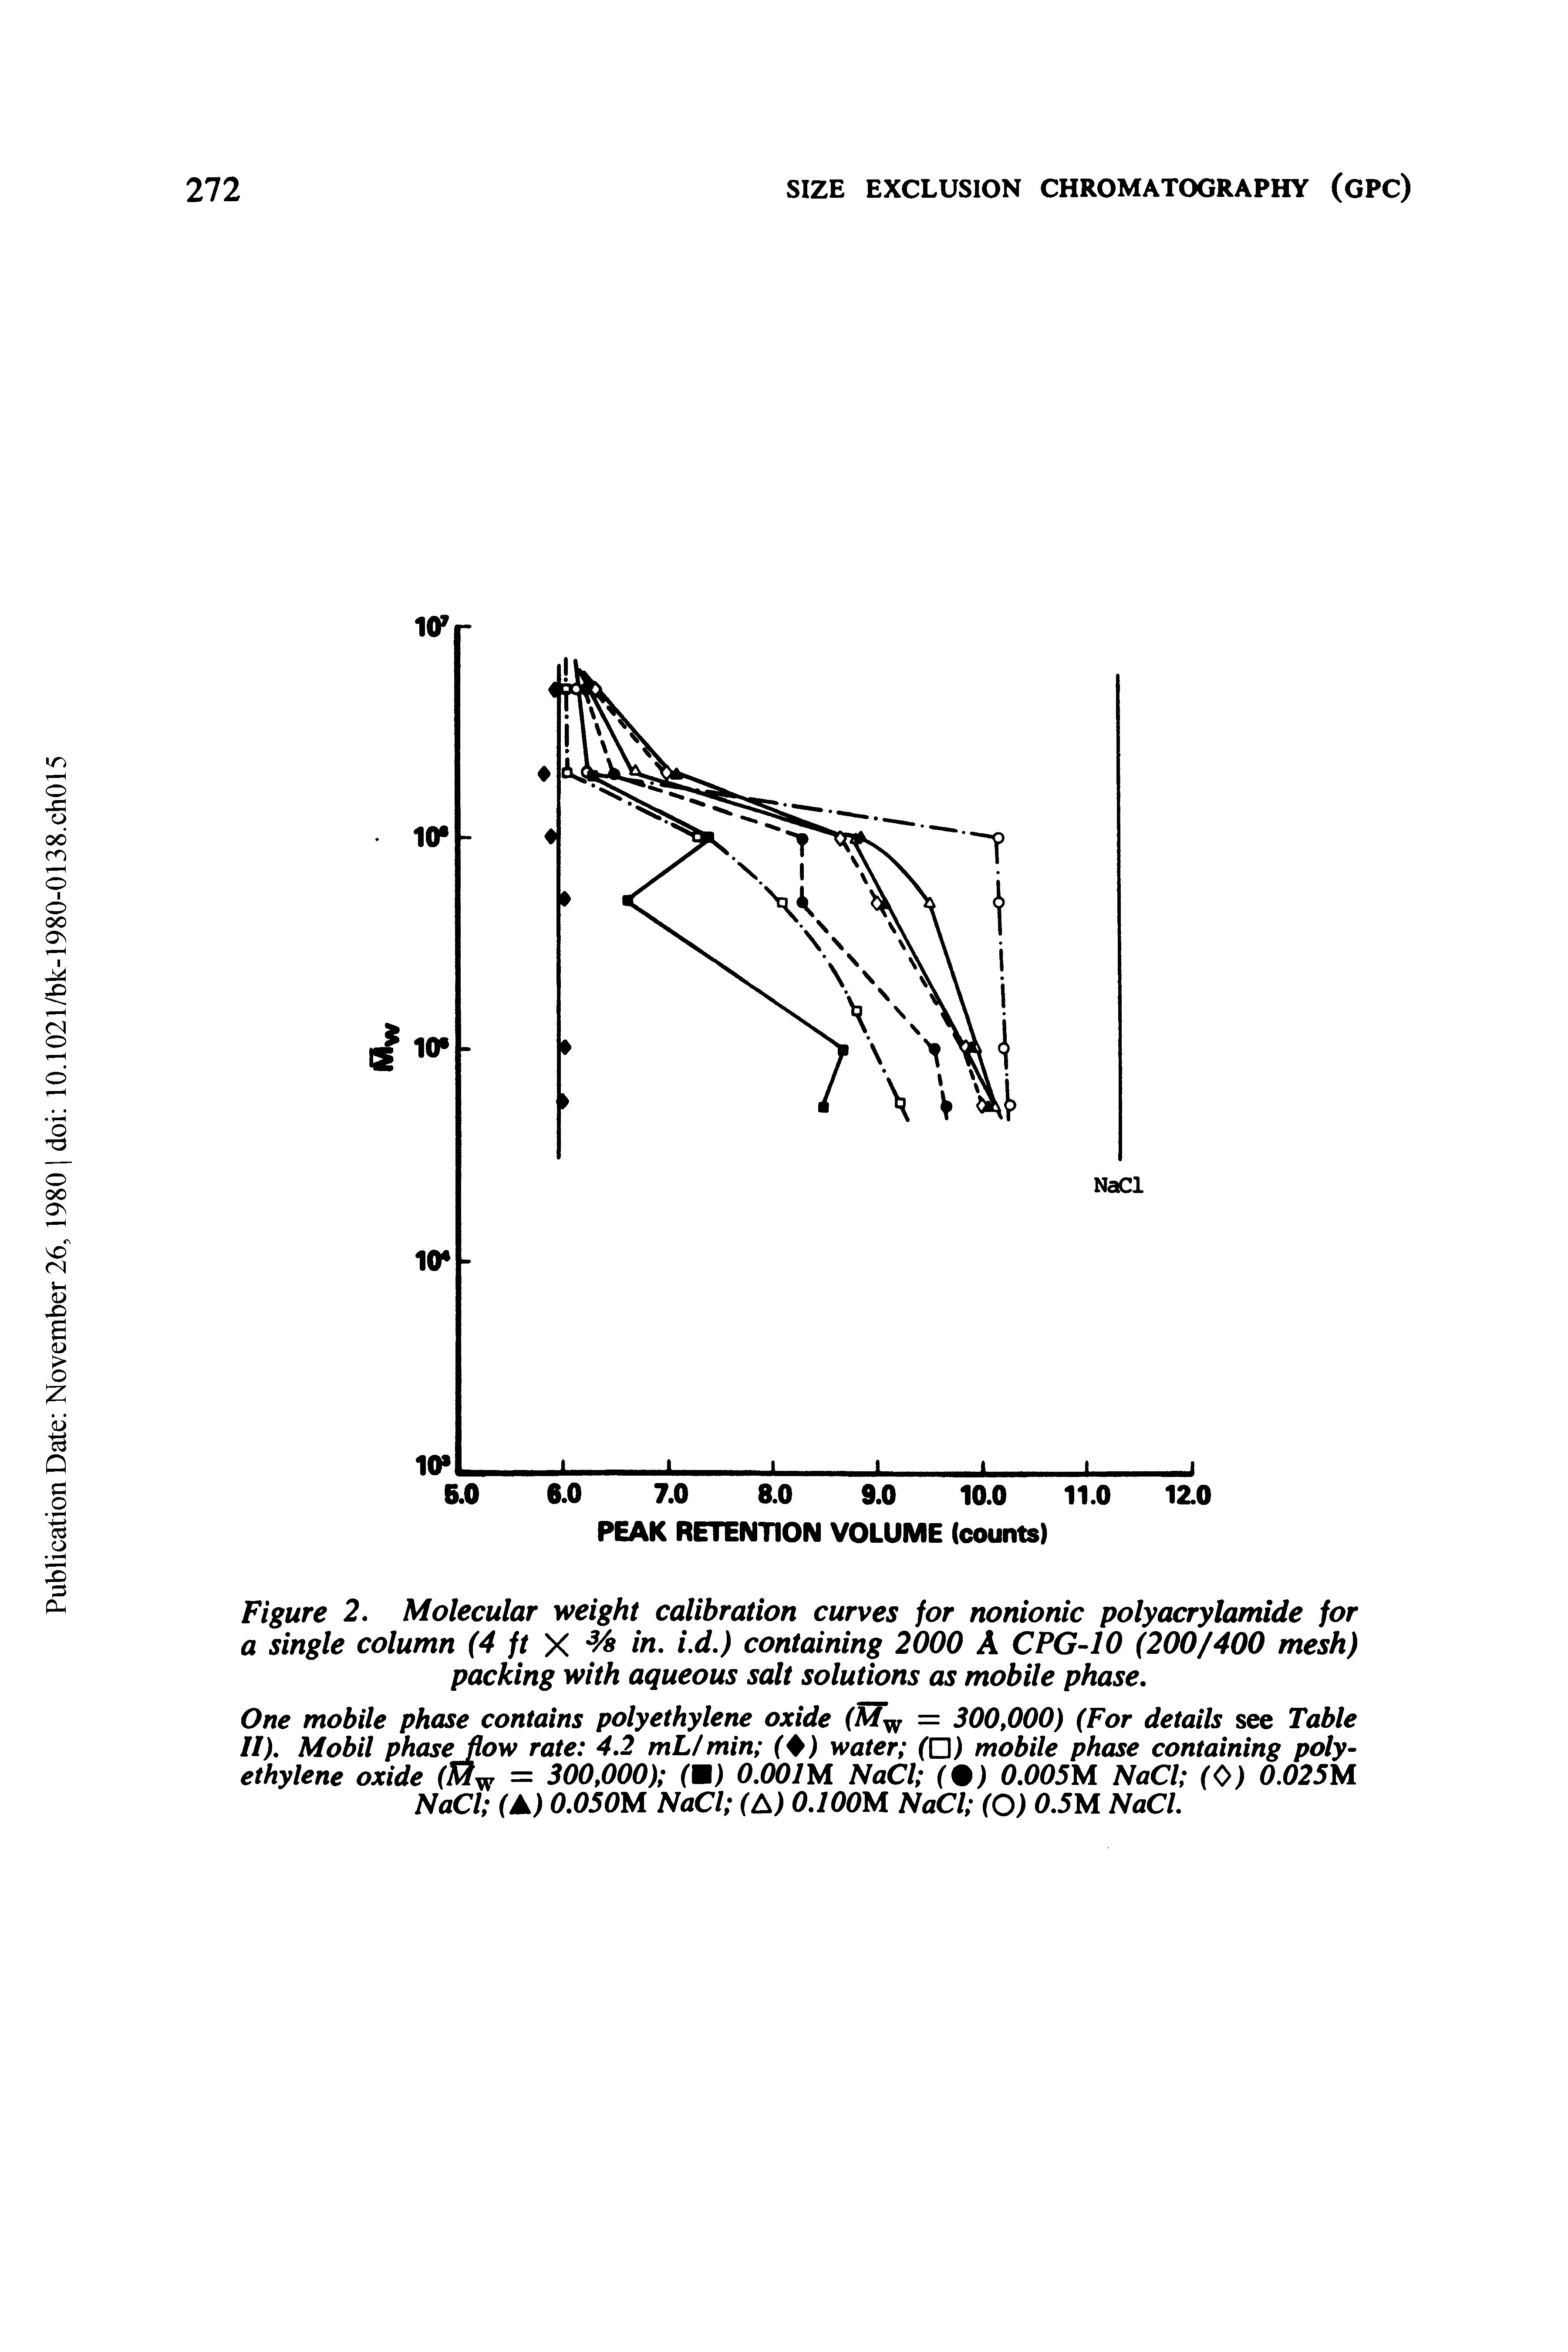 Figure 2. Molecular weight calibration curves for nonionic polyacrylamide for a single column (4 ft X Vs in. i.d.) containing 2000 A CPG-10 (200/400 mesh) packing with aqueous salt solutions as mobile phase.